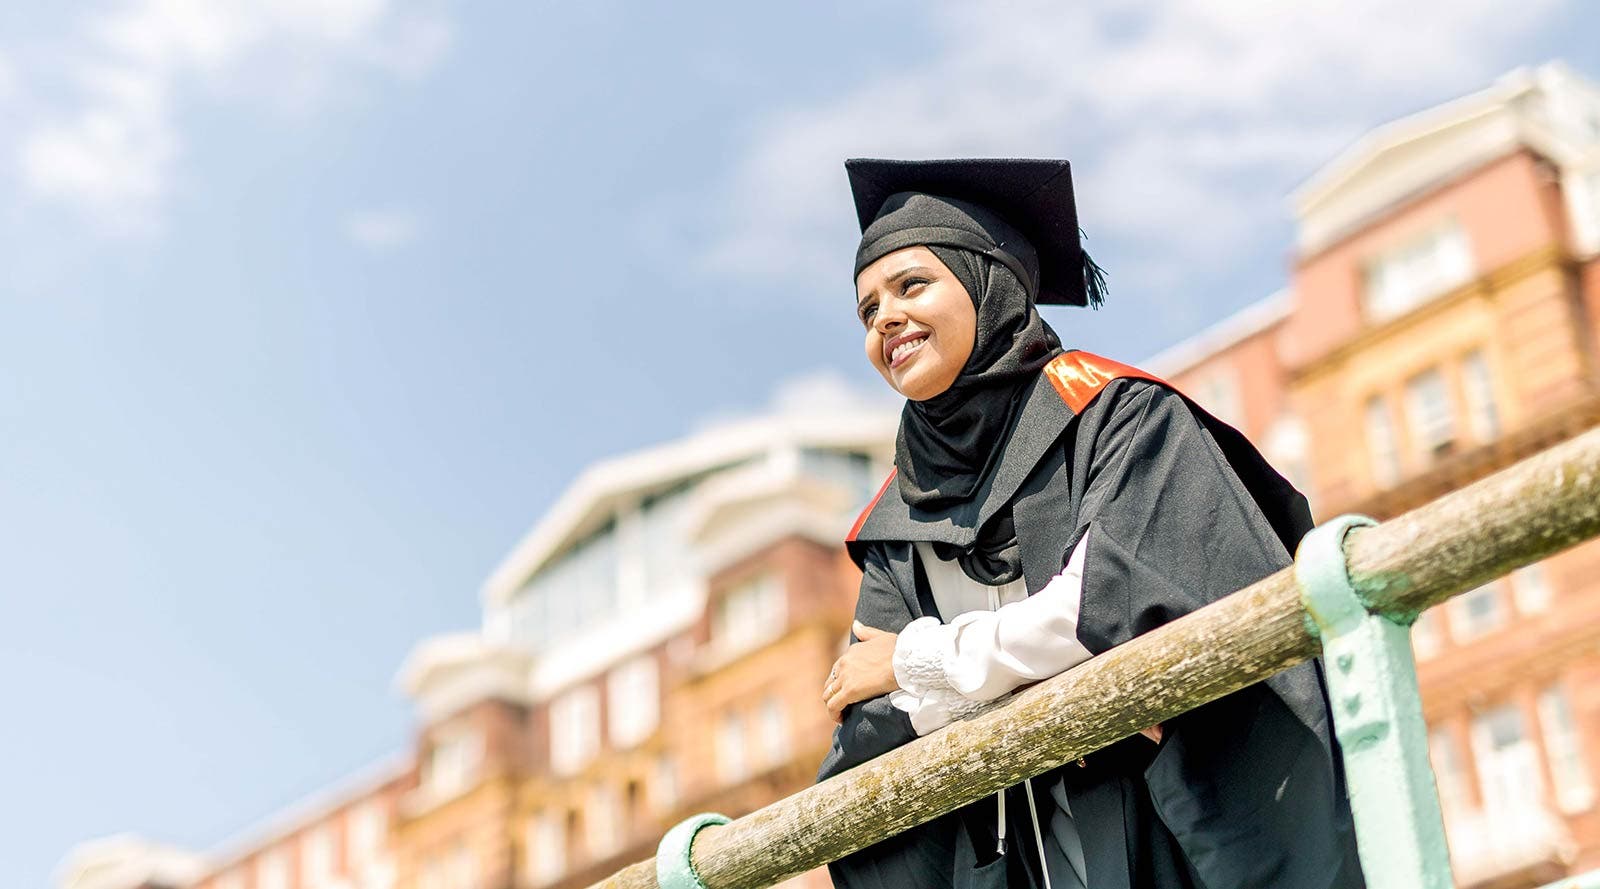 Graduate from the University of Sussex to change the world